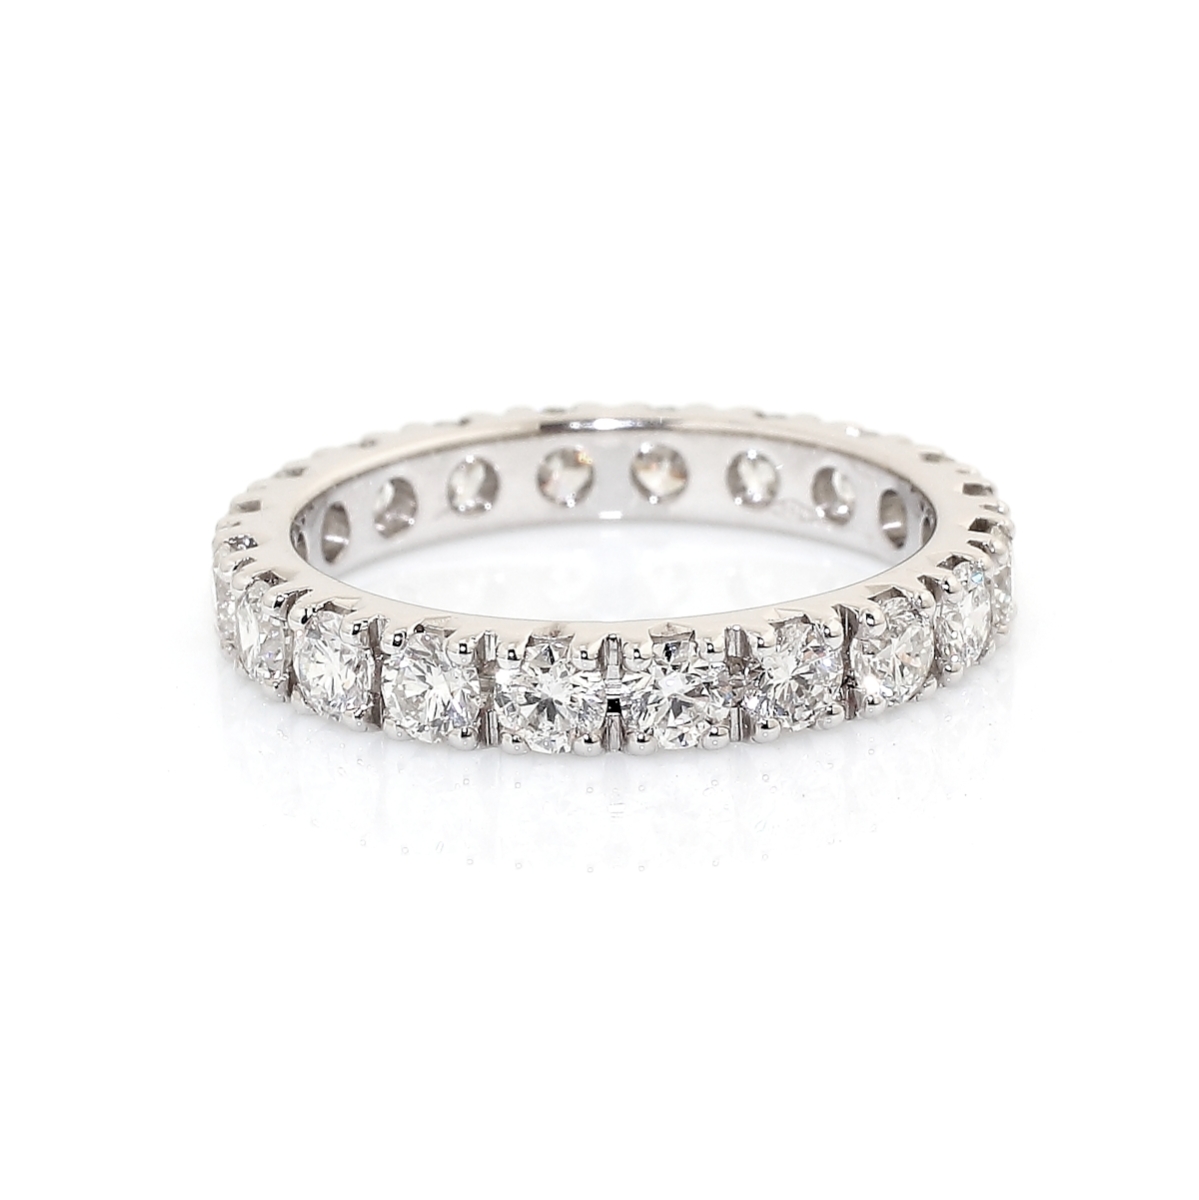 750 Mill. White Gold Ring with 1,80 Ct. Diamonds